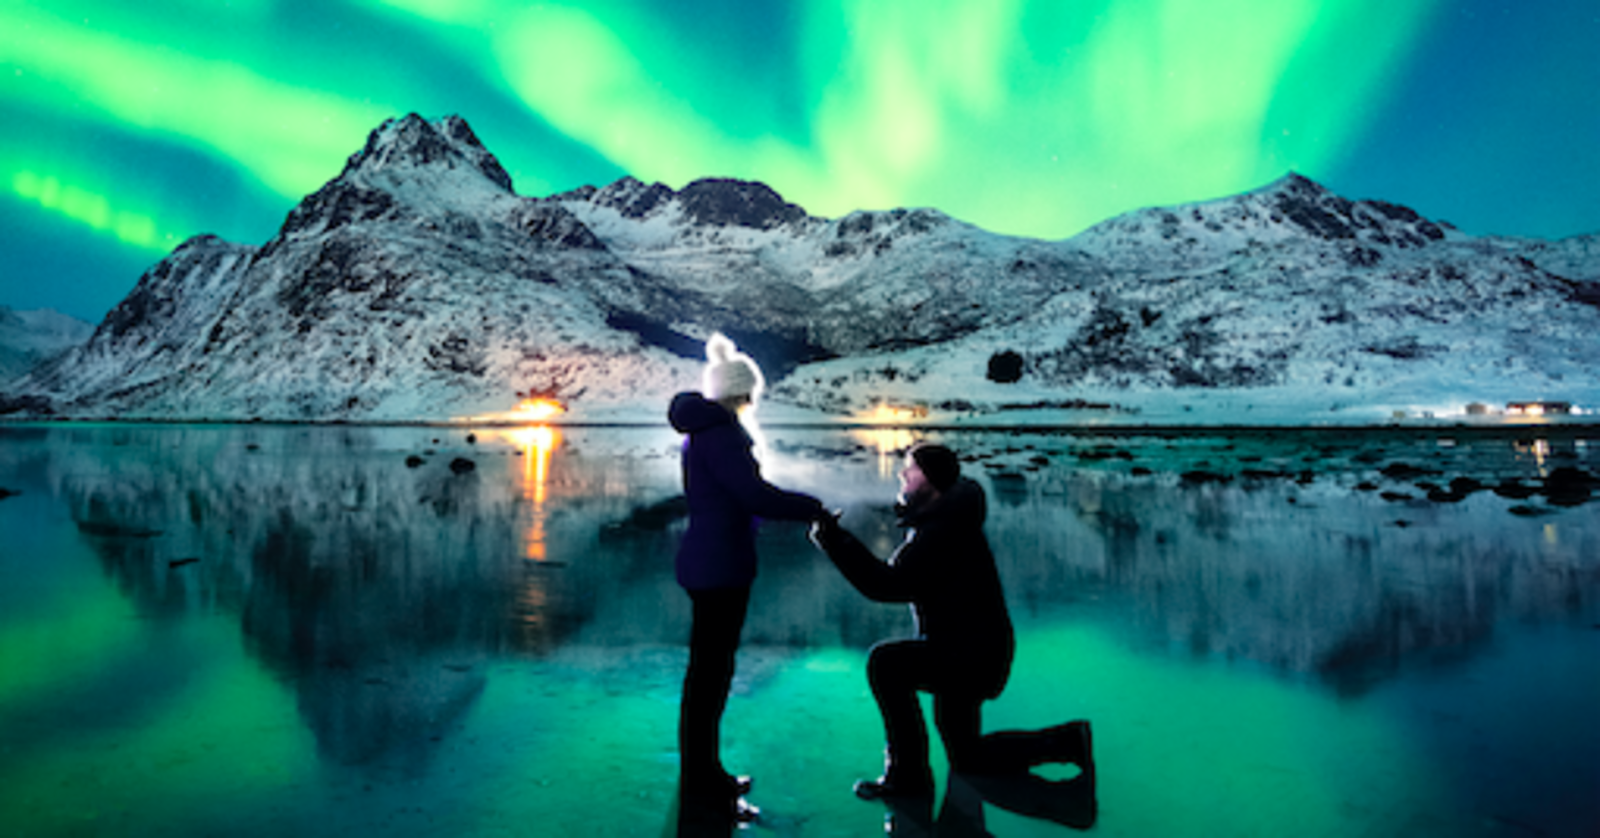 Romantic Boyfriend Proposes Under The Northern Lights... The Pictures Are Amazing!